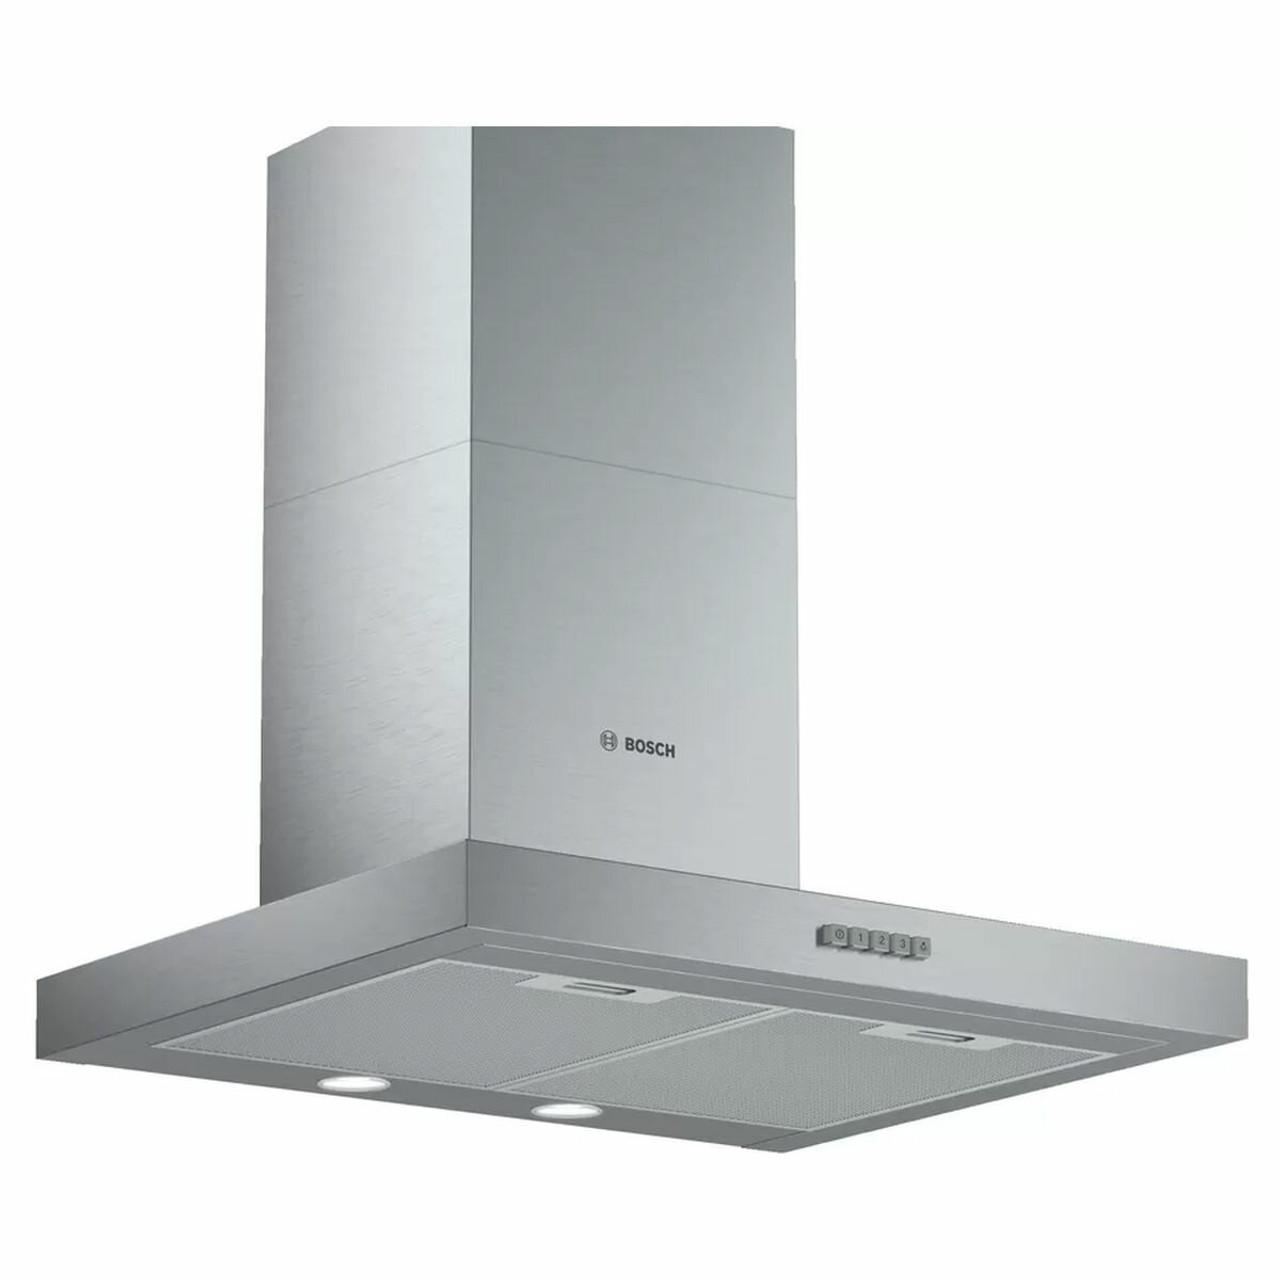 DWB65BC50A - Serie 2 Wall-Mounted Canopy Rangehood 60cm - Stainless Steel